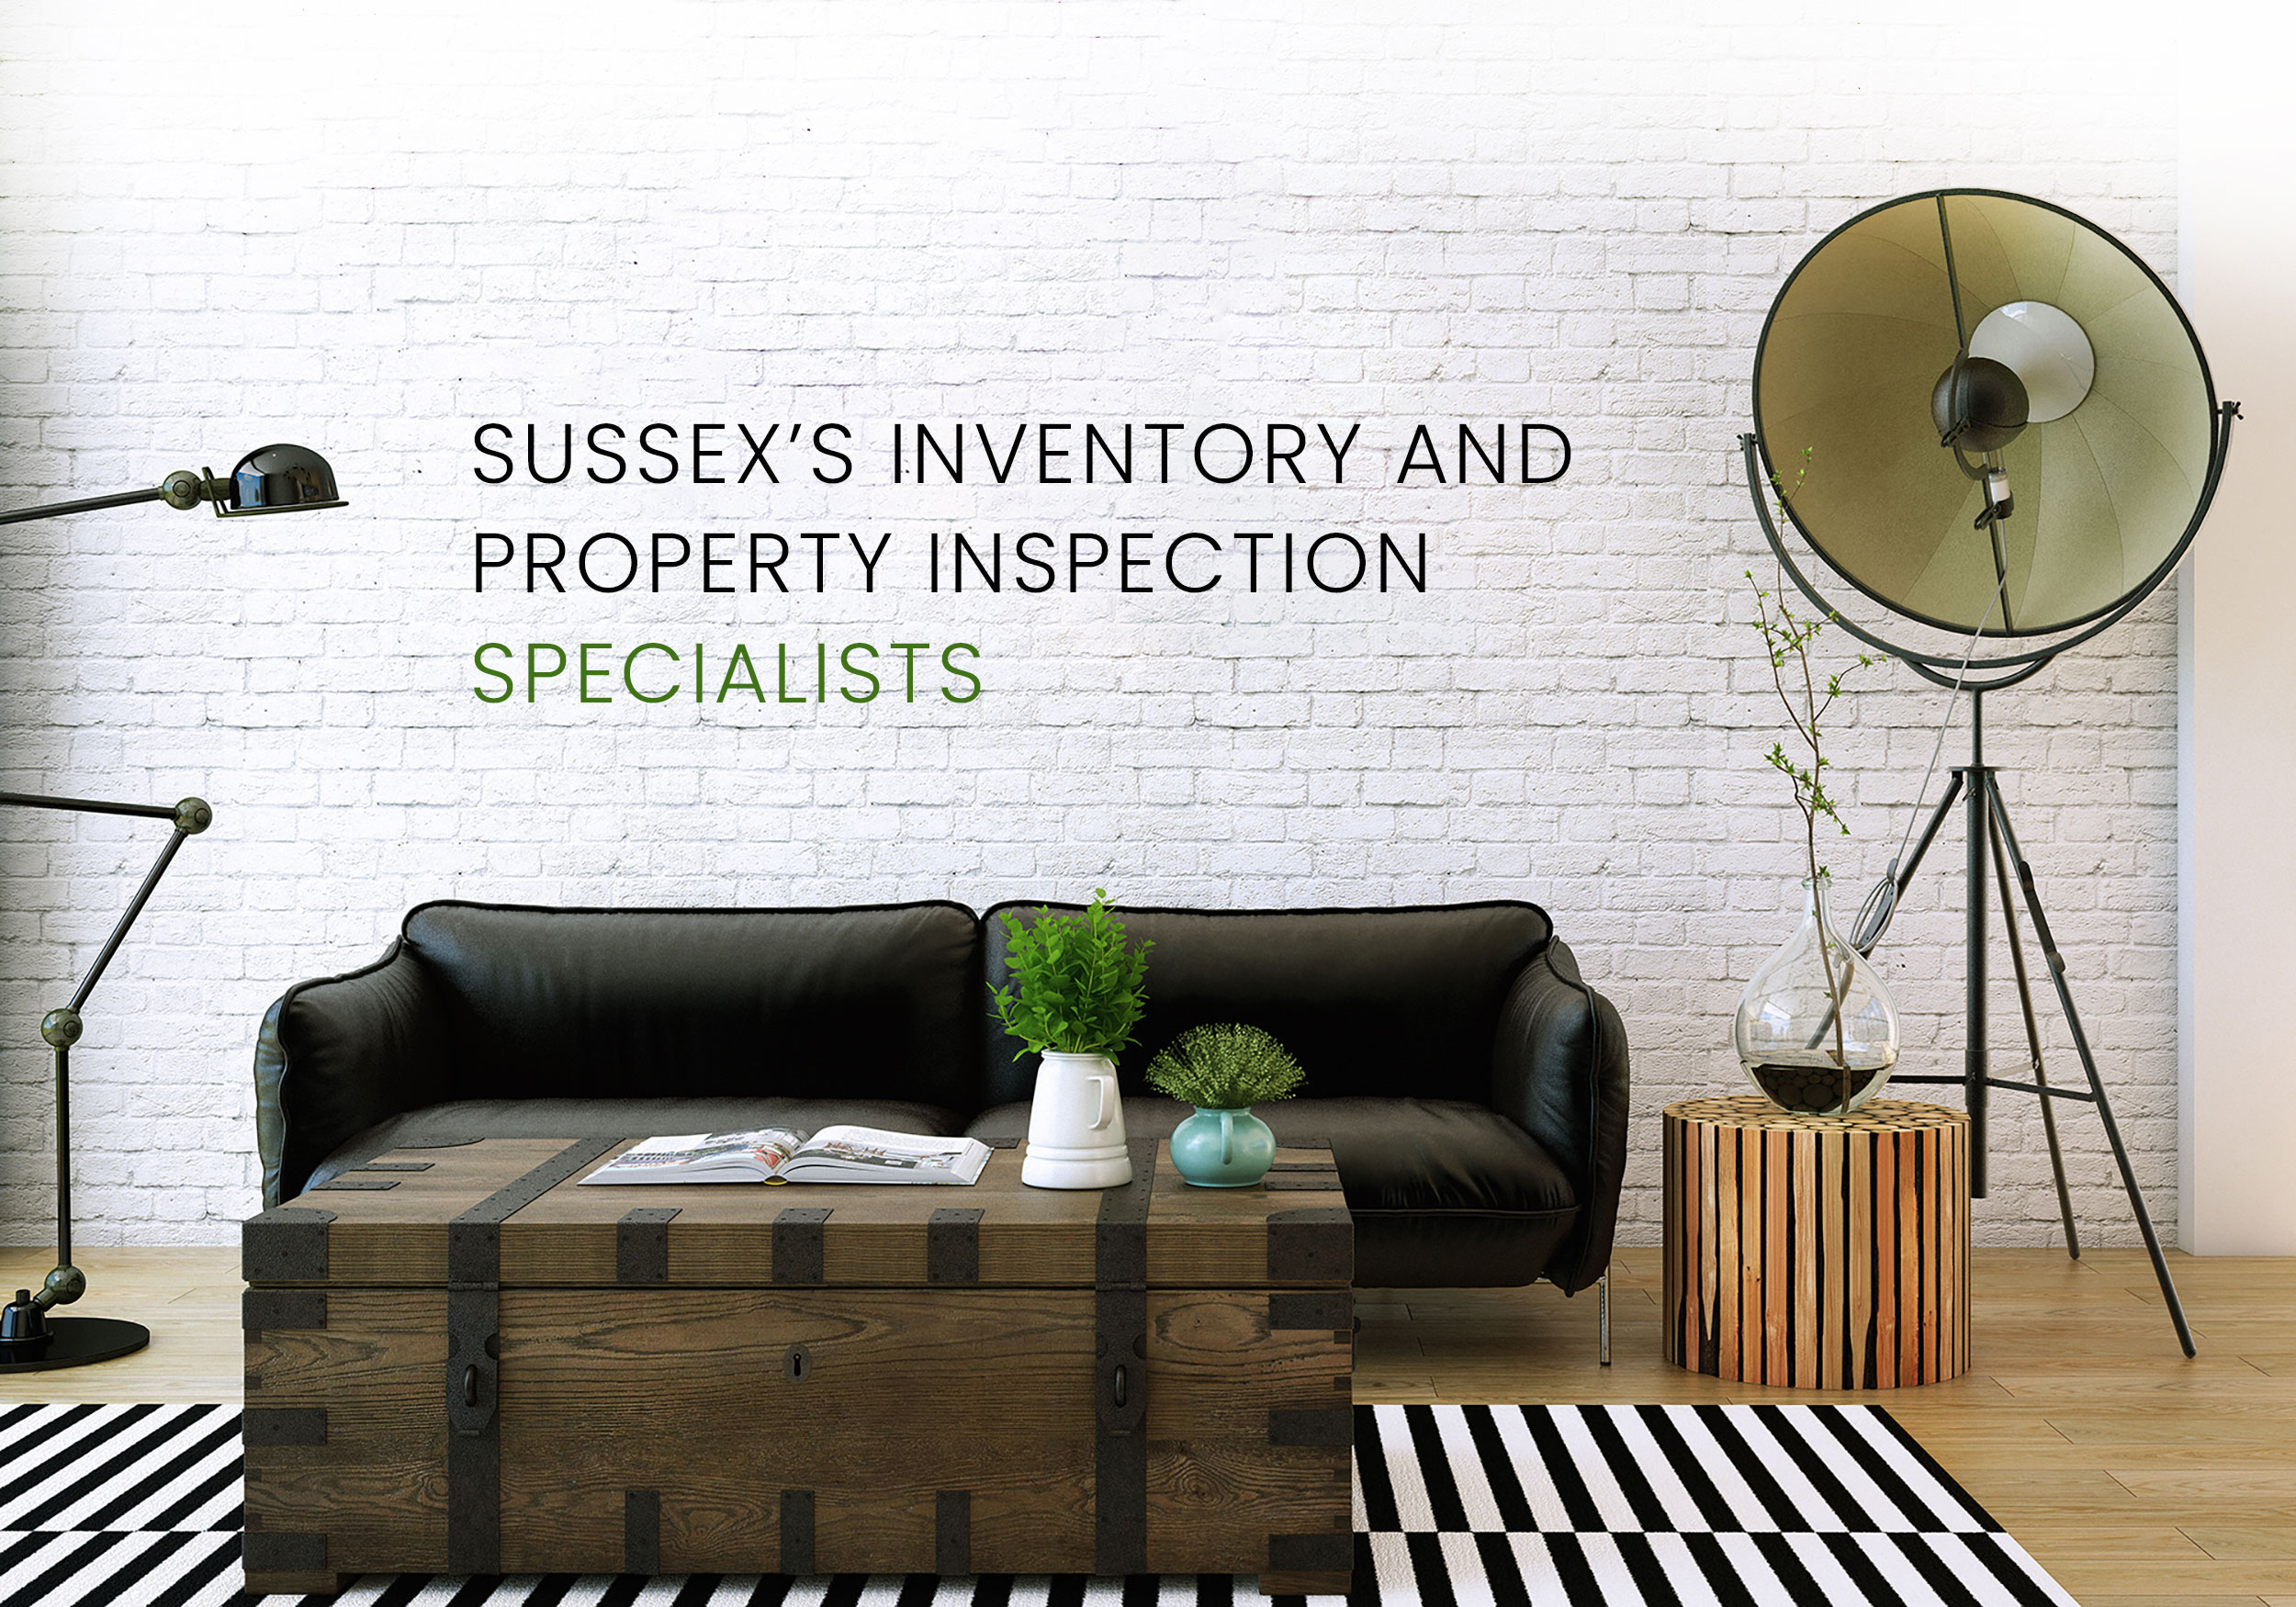 Property inventory and inspection service